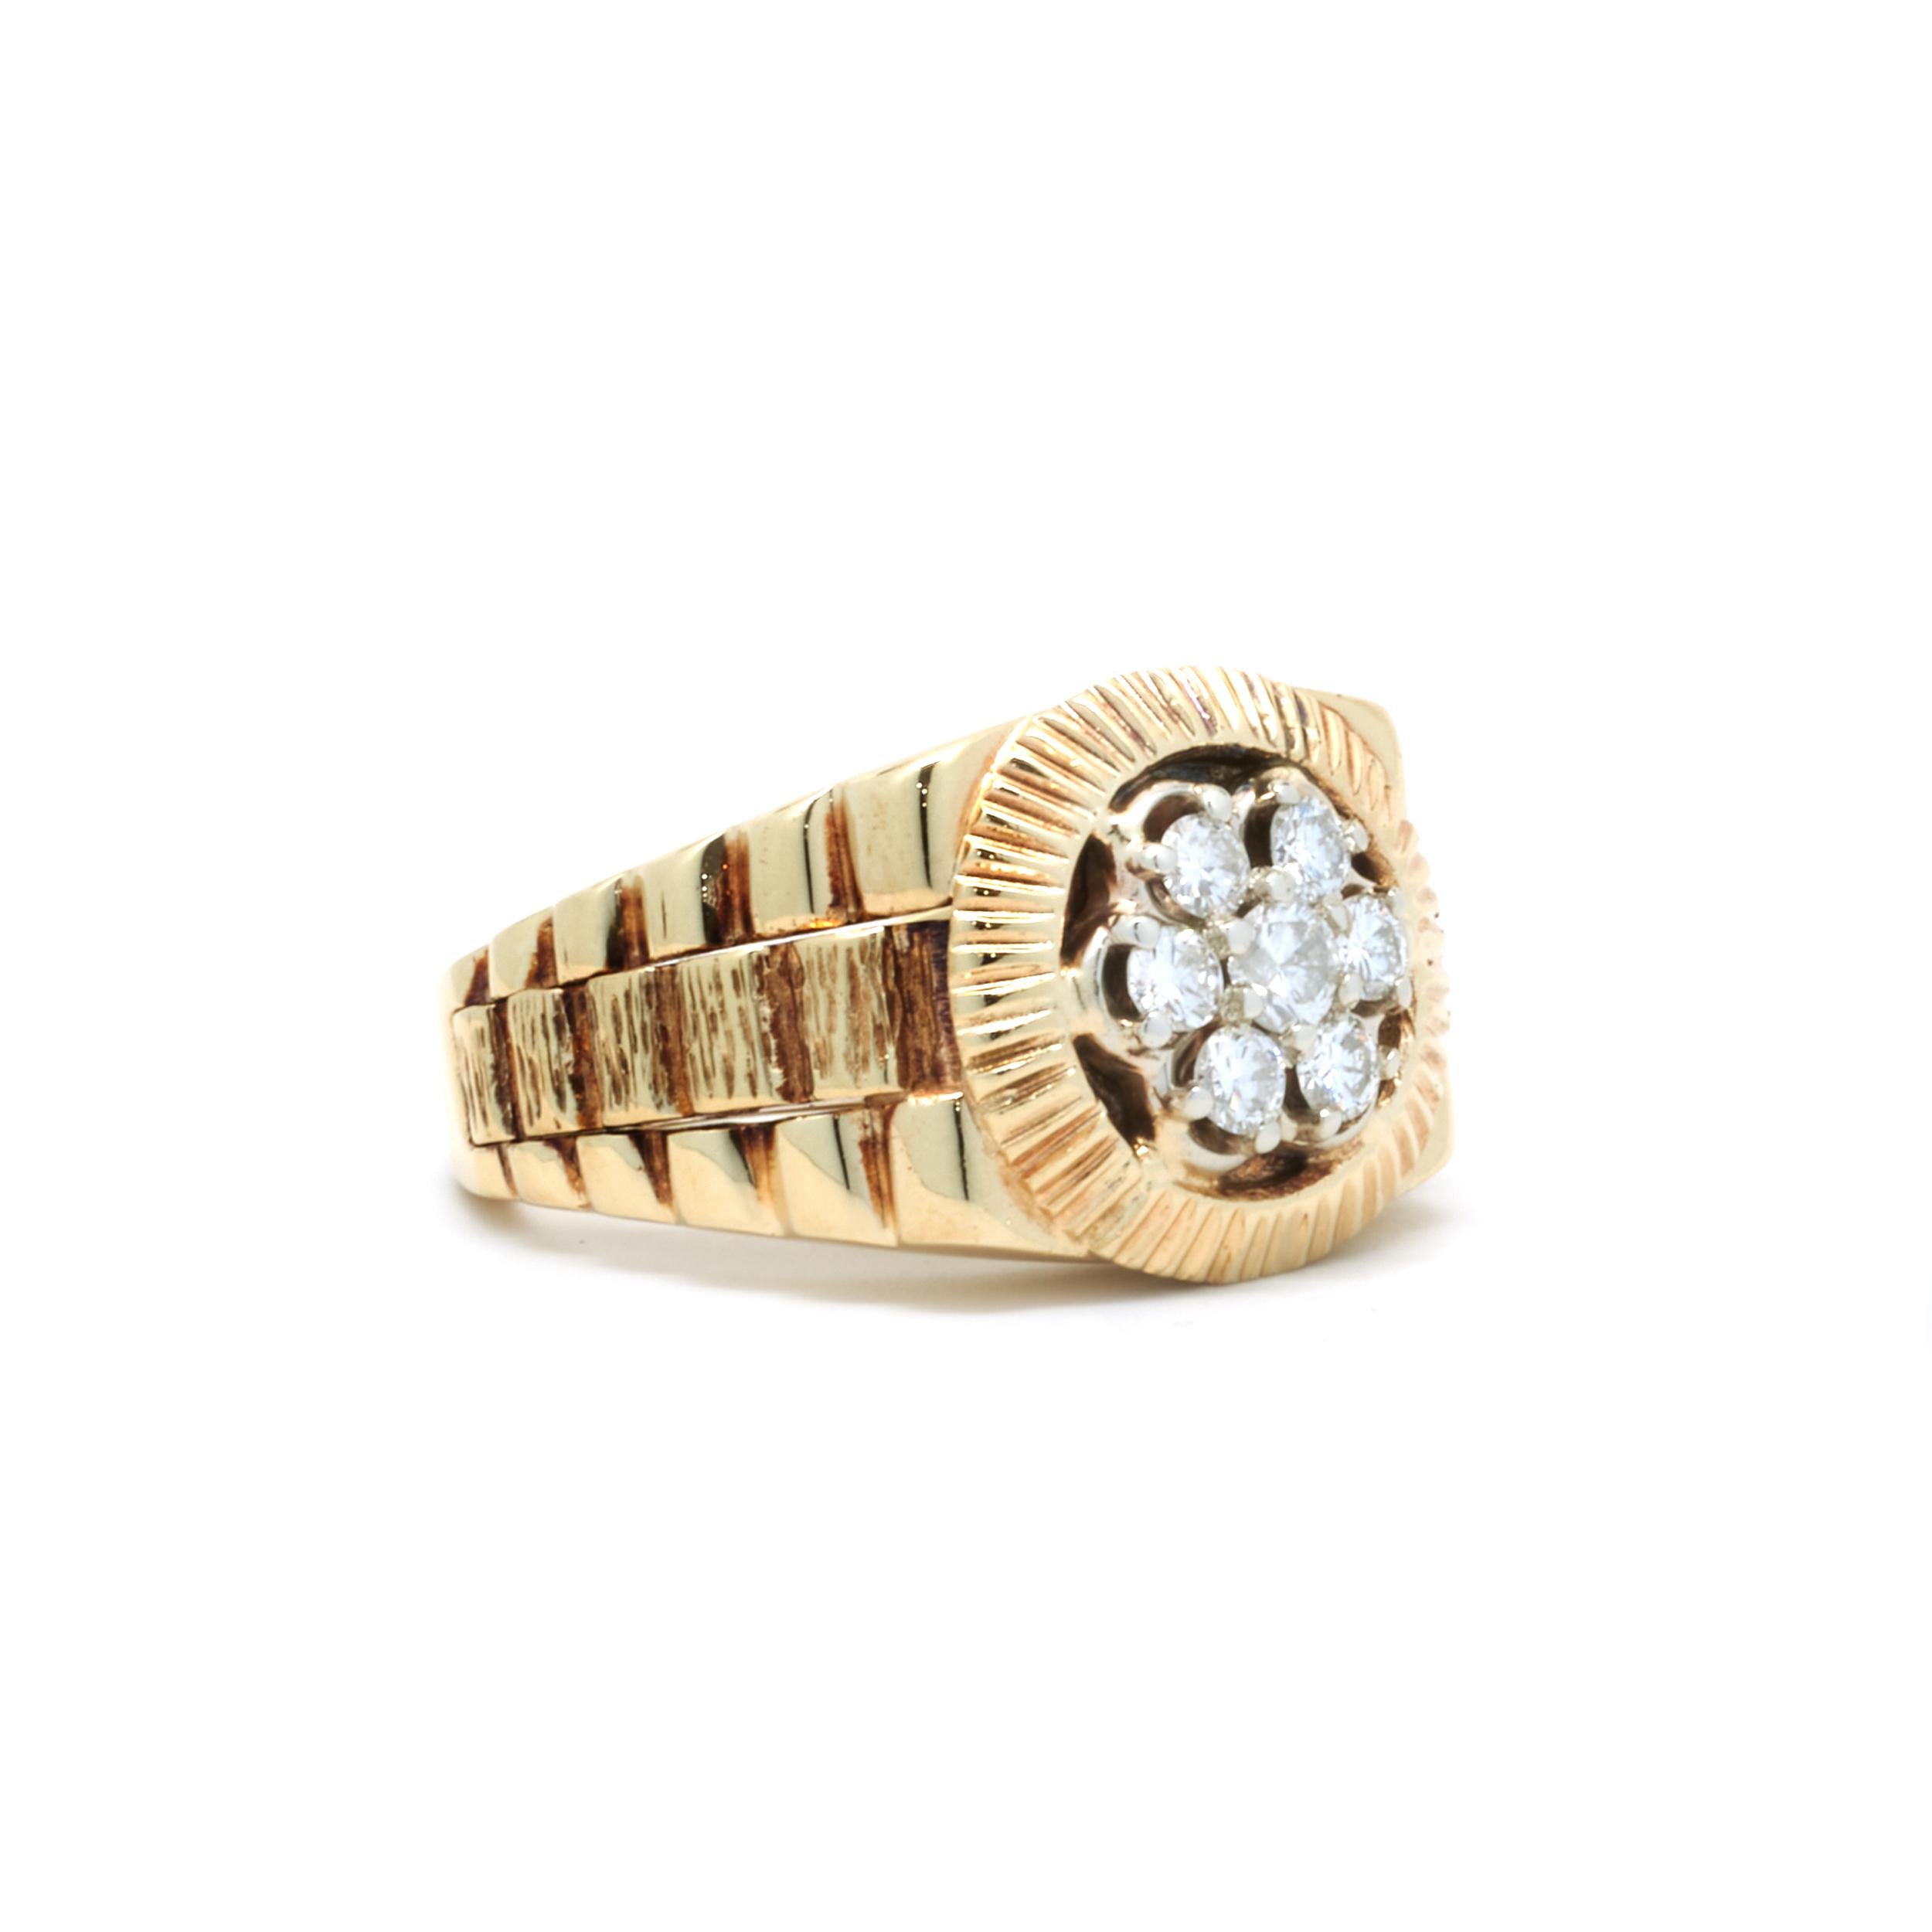 Designer: custom
Material: 14K yellow gold
Diamond: 7 round brilliant cut = .50cttw
Color: H
Clarity: SI1-2
Ring size: 8.25 (please allow two additional shipping days for sizing requests)
Weight:  14.03 grams